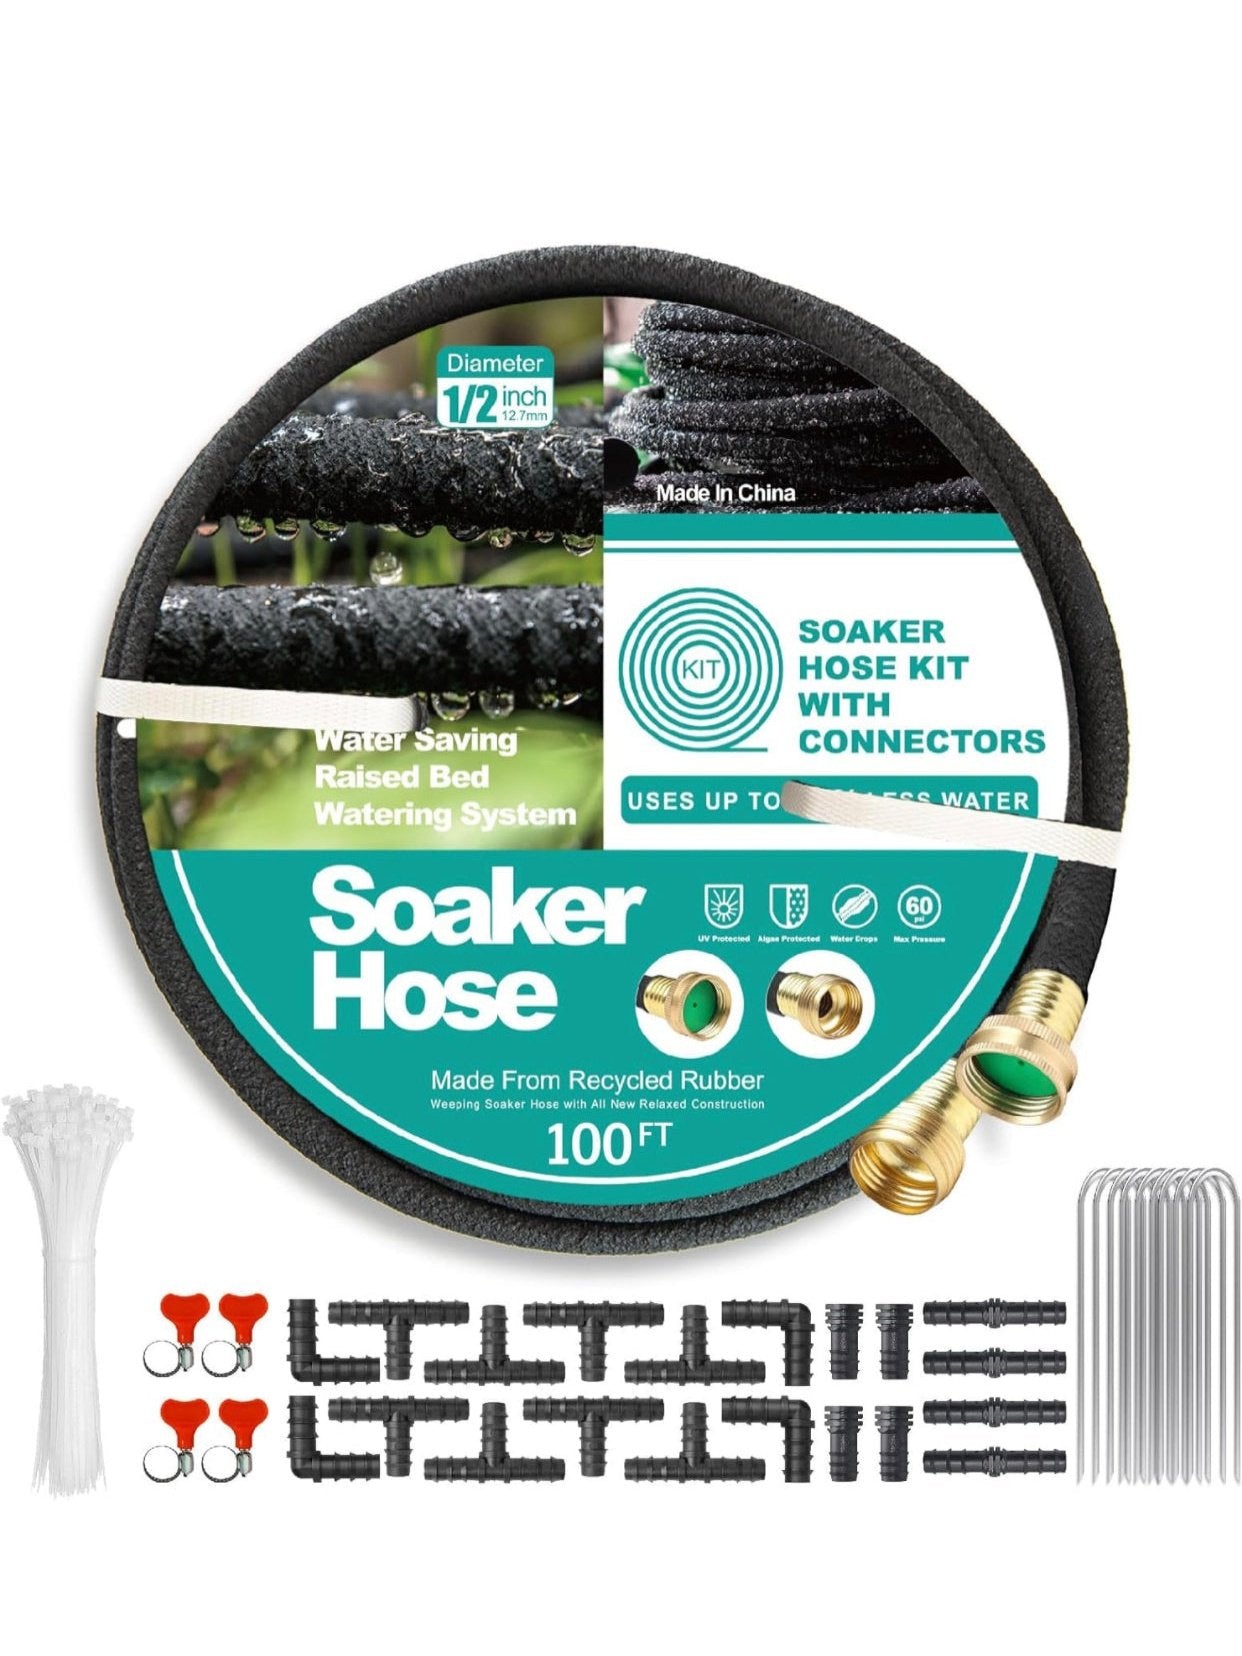 Soaker Hose 100 FT,1/2" Heavy Duty Soaker Garden Hose with Solid Brass Connector for for Garden Vegetable Beds, Tree,Lawn and Plants…